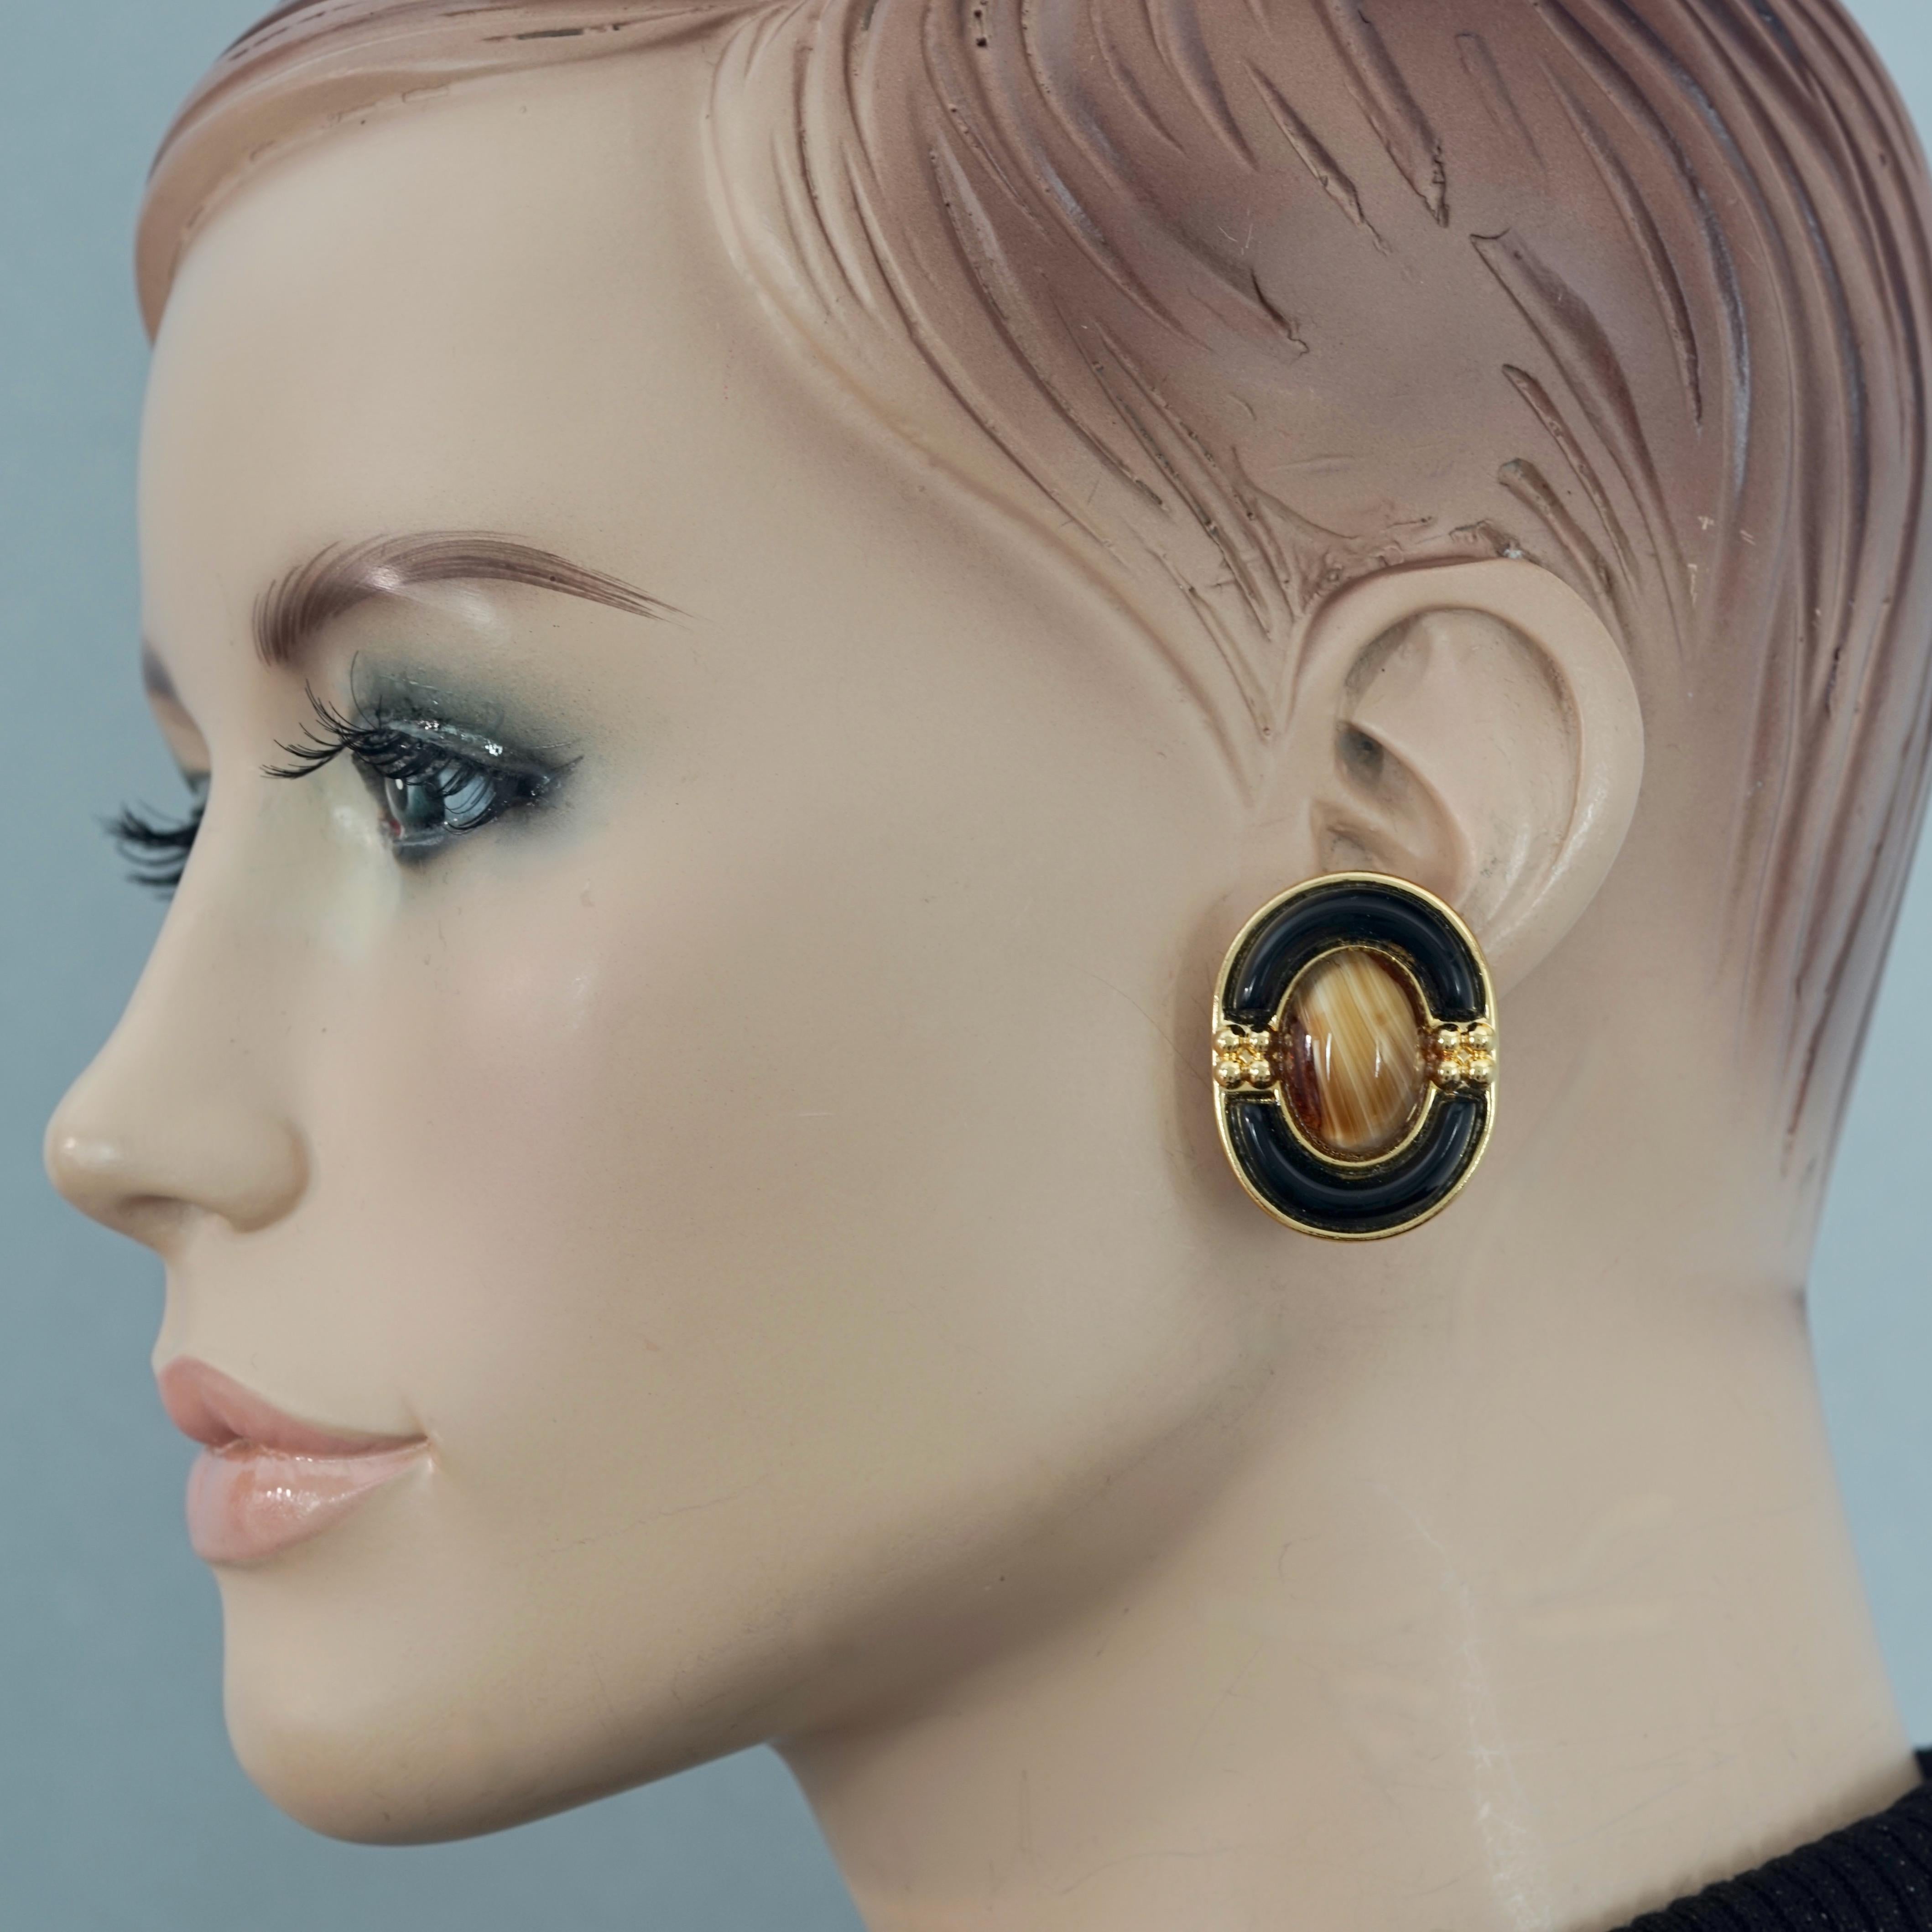 Vintage 1971 CHRISTIAN DIOR Tiger Eye Oval Glass Cabochon Earrings

Measurements:
Height: 1.34 inches (3.4 cm)
Width: 1.02 inches (2.6 cm)
Weight per Earring: 14 grams

Features:
- 100% Authentic CHRISTIAN DIOR.
- Glass tiger eye cabochon surrounded